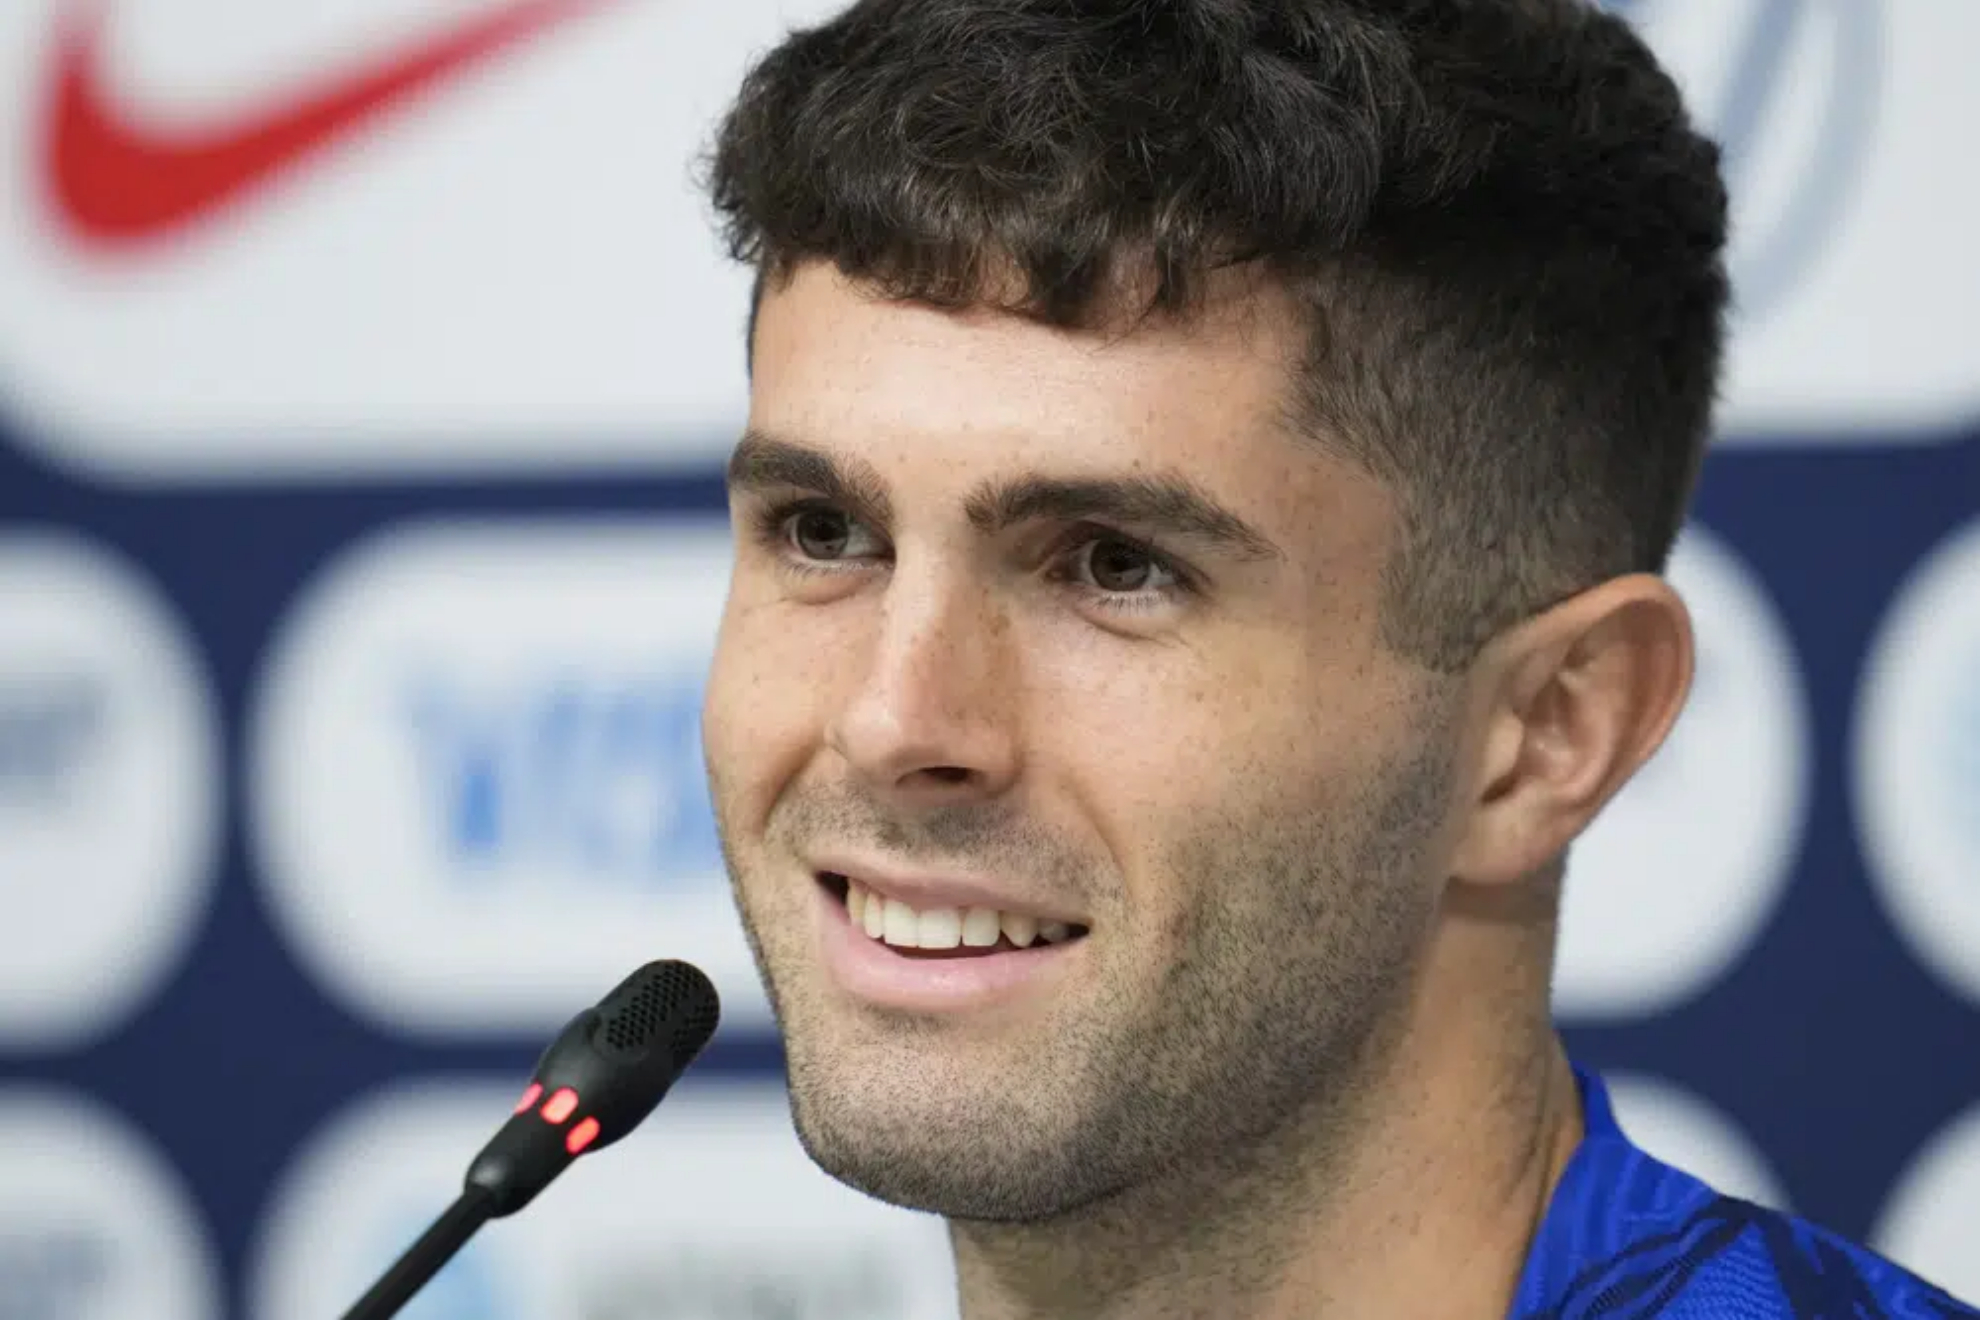 Christian Pulisic during the Qatar 2022 FIFA World Cup.